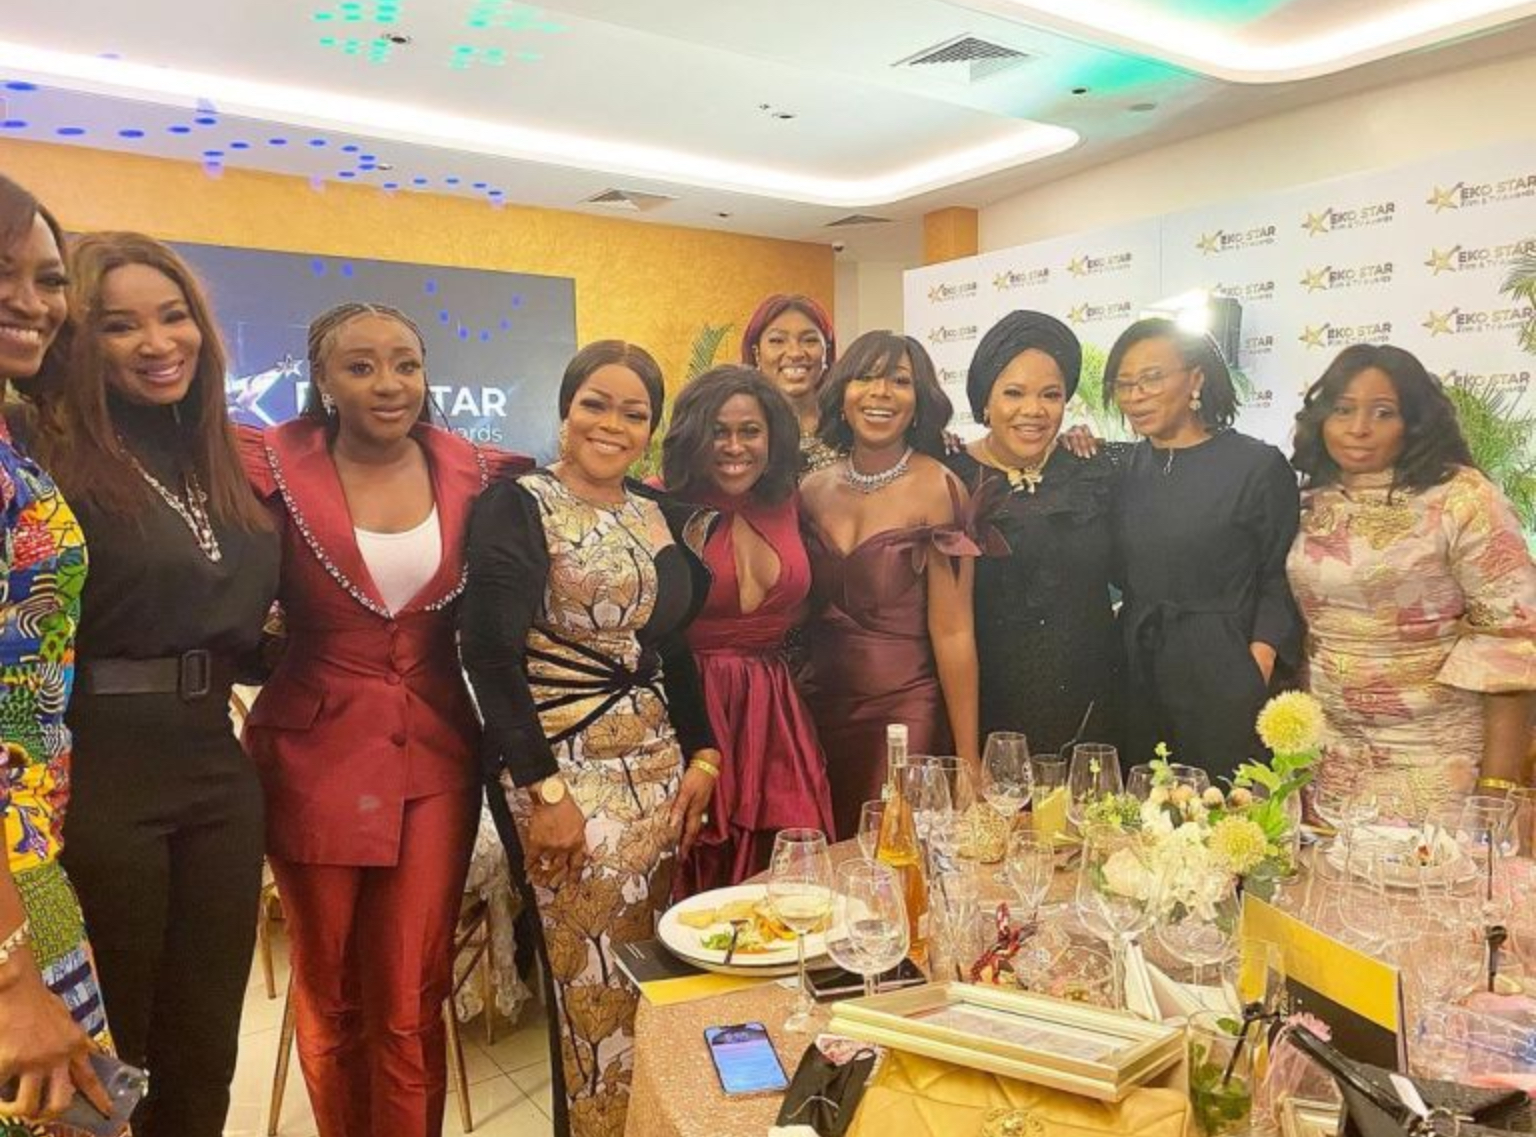 See Group Photo Toyin Abraham Posted That Has Top Celebrities In it